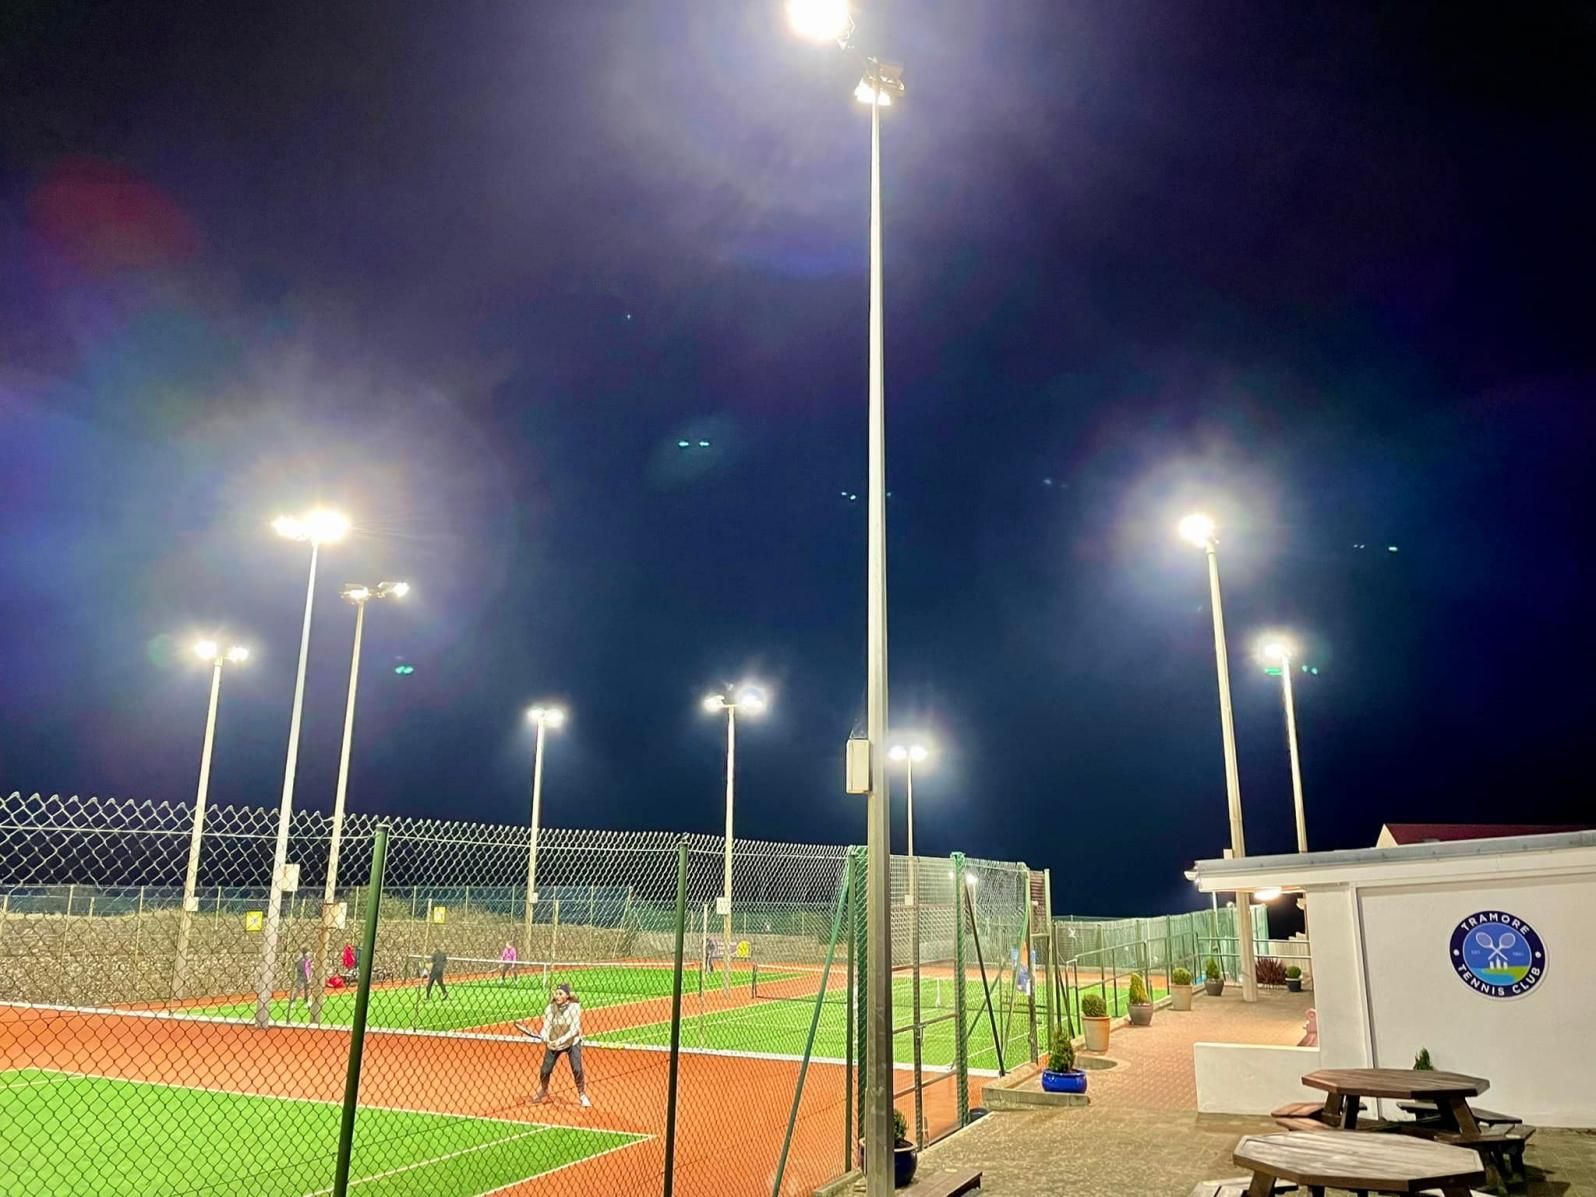 New LED Lighting Upgrade for Tramore Tennis Club